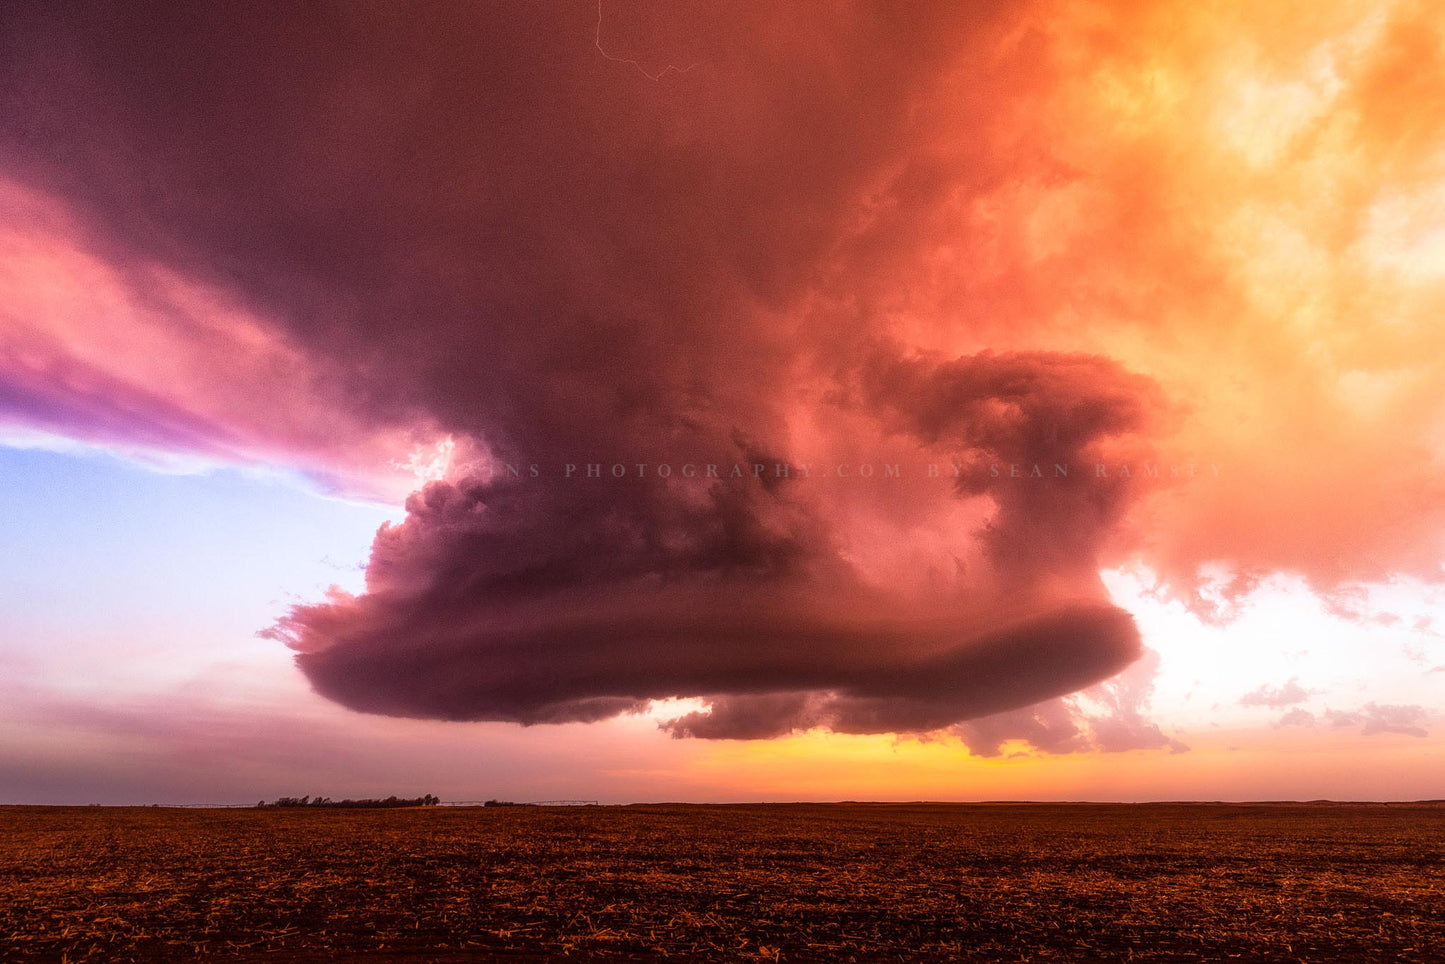 Storm photography print of a low precipitation supercell thunderstorm hovering over a field at sunset on a stormy spring evening in Kansas by Sean Ramsey of Southern Plains Photography.